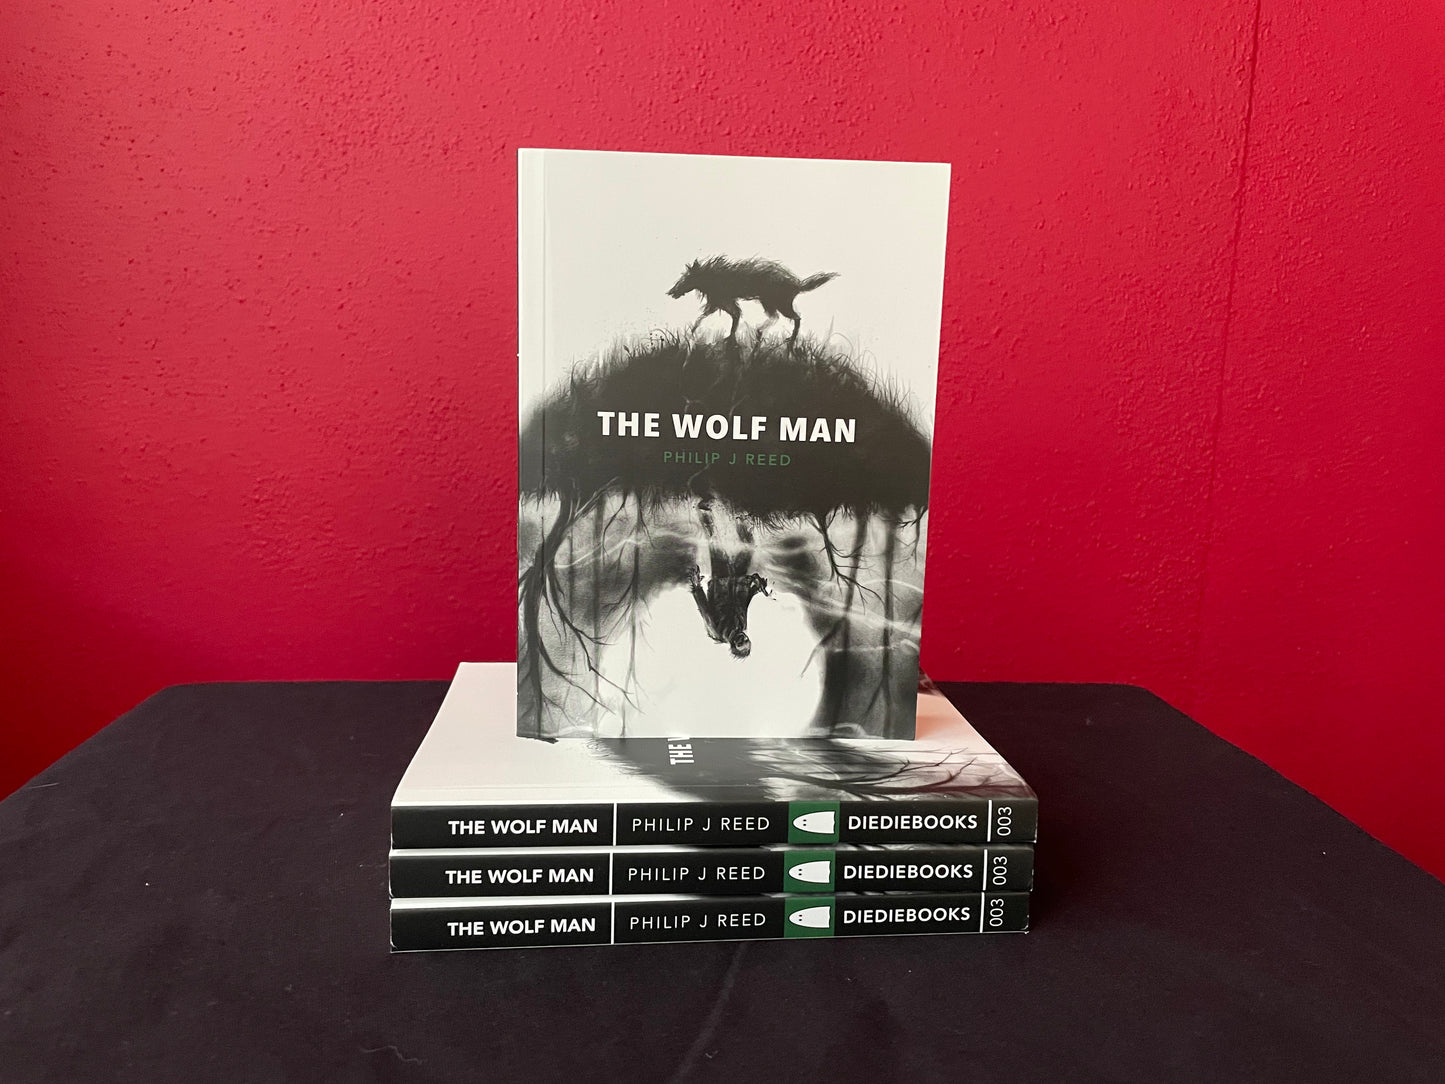 Front and side view of the cover art and design for The Wolf Man by Philip J Reed